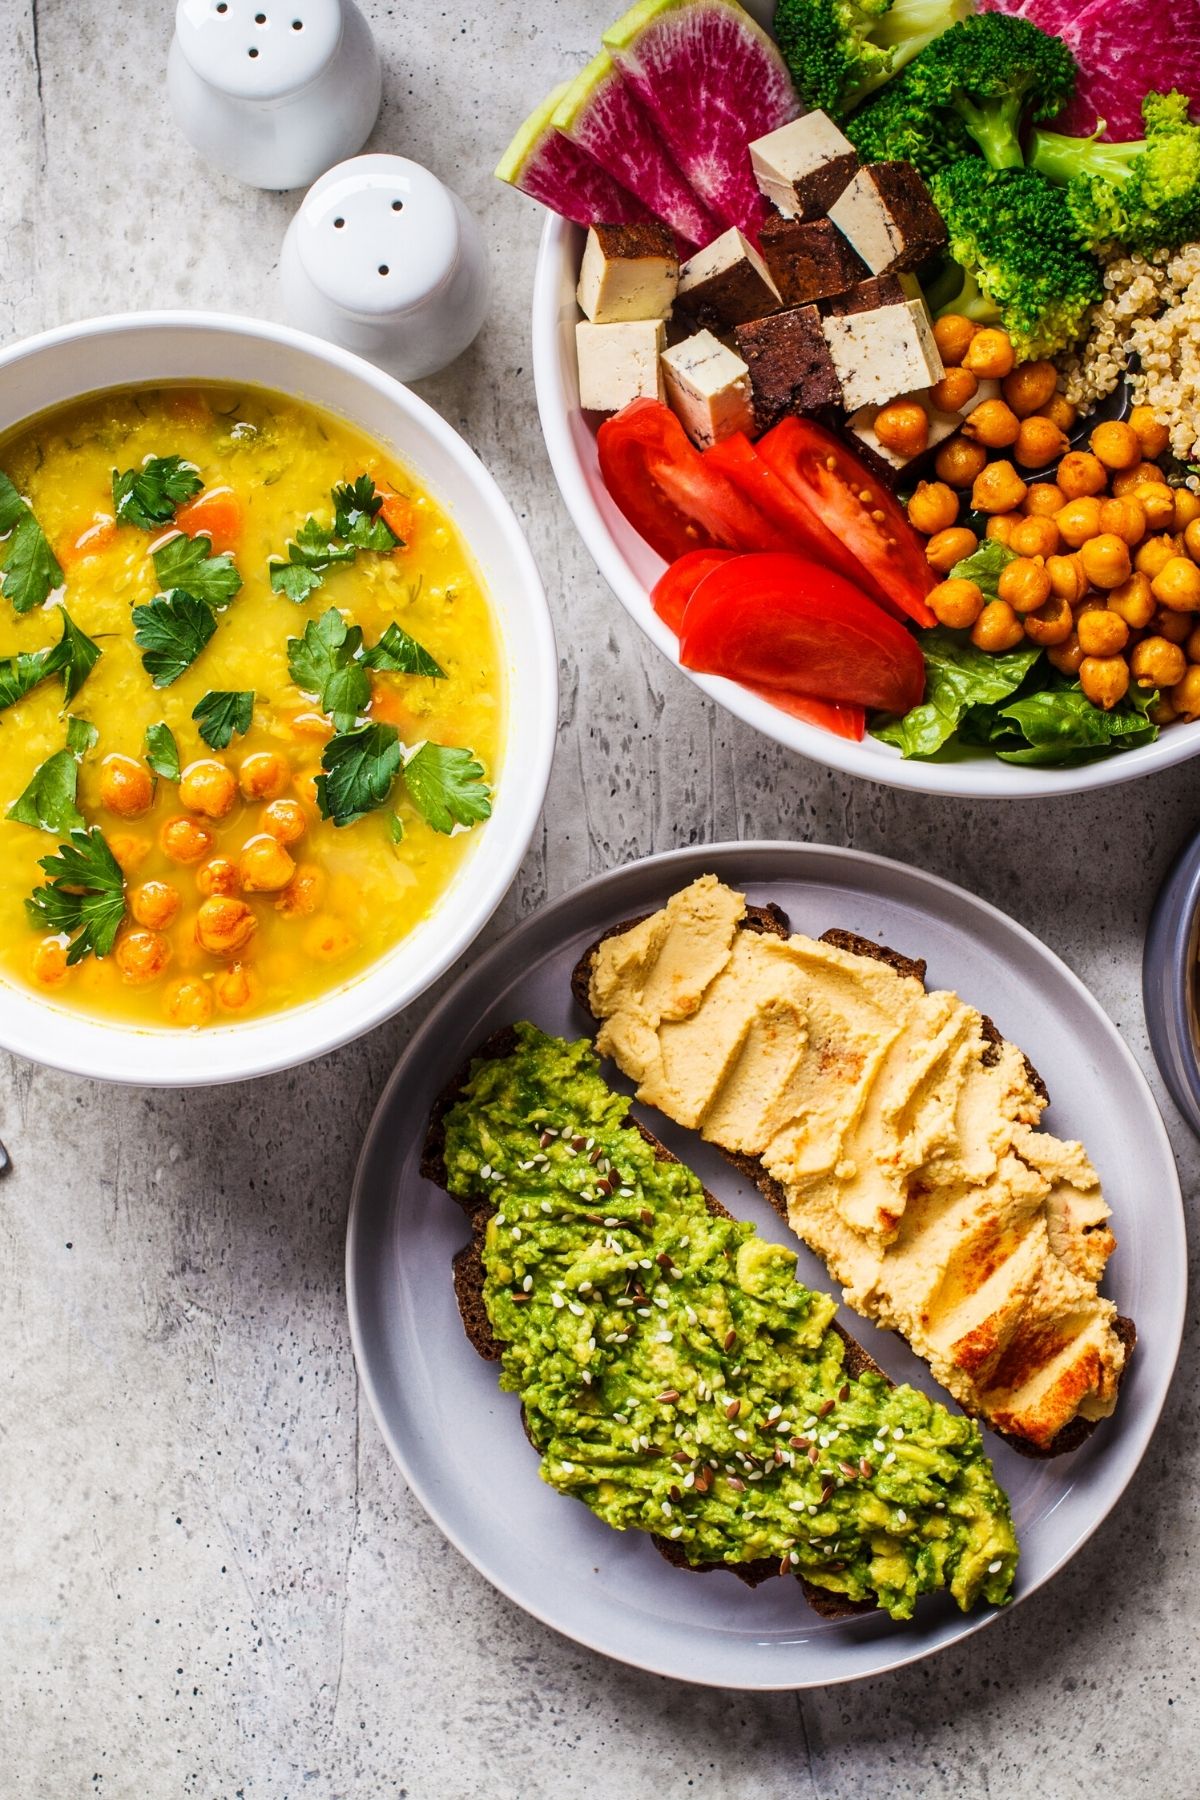 dishes with colorful plant-based meals on a table.